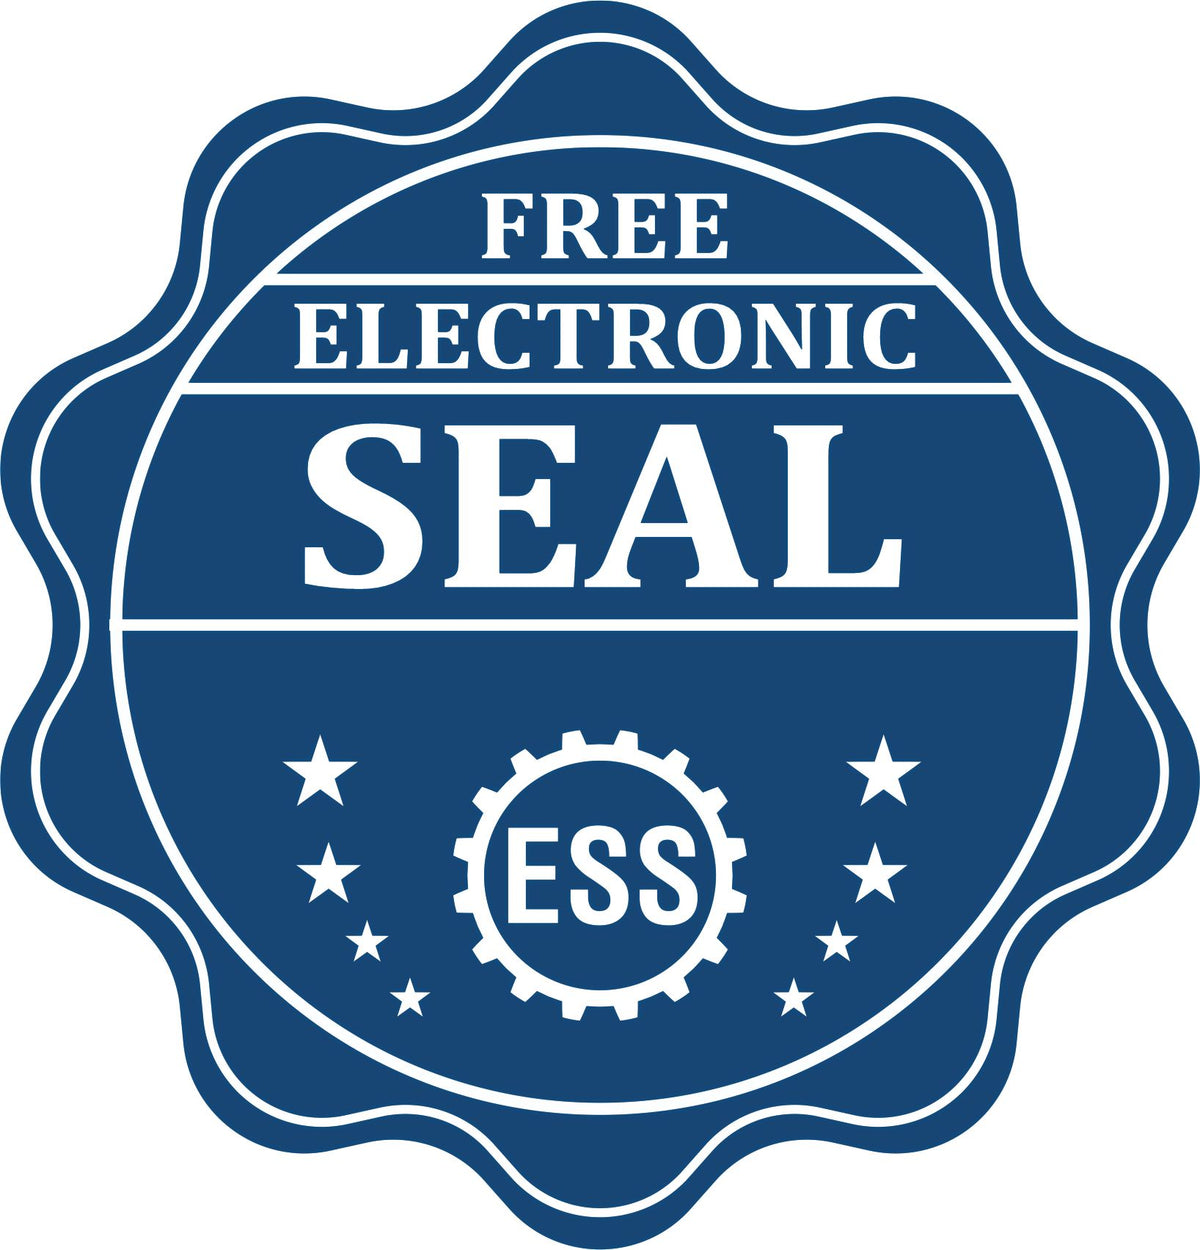 A badge showing a free electronic seal for the Hybrid Arizona Engineer Seal with stars and the ESS gear on the emblem.